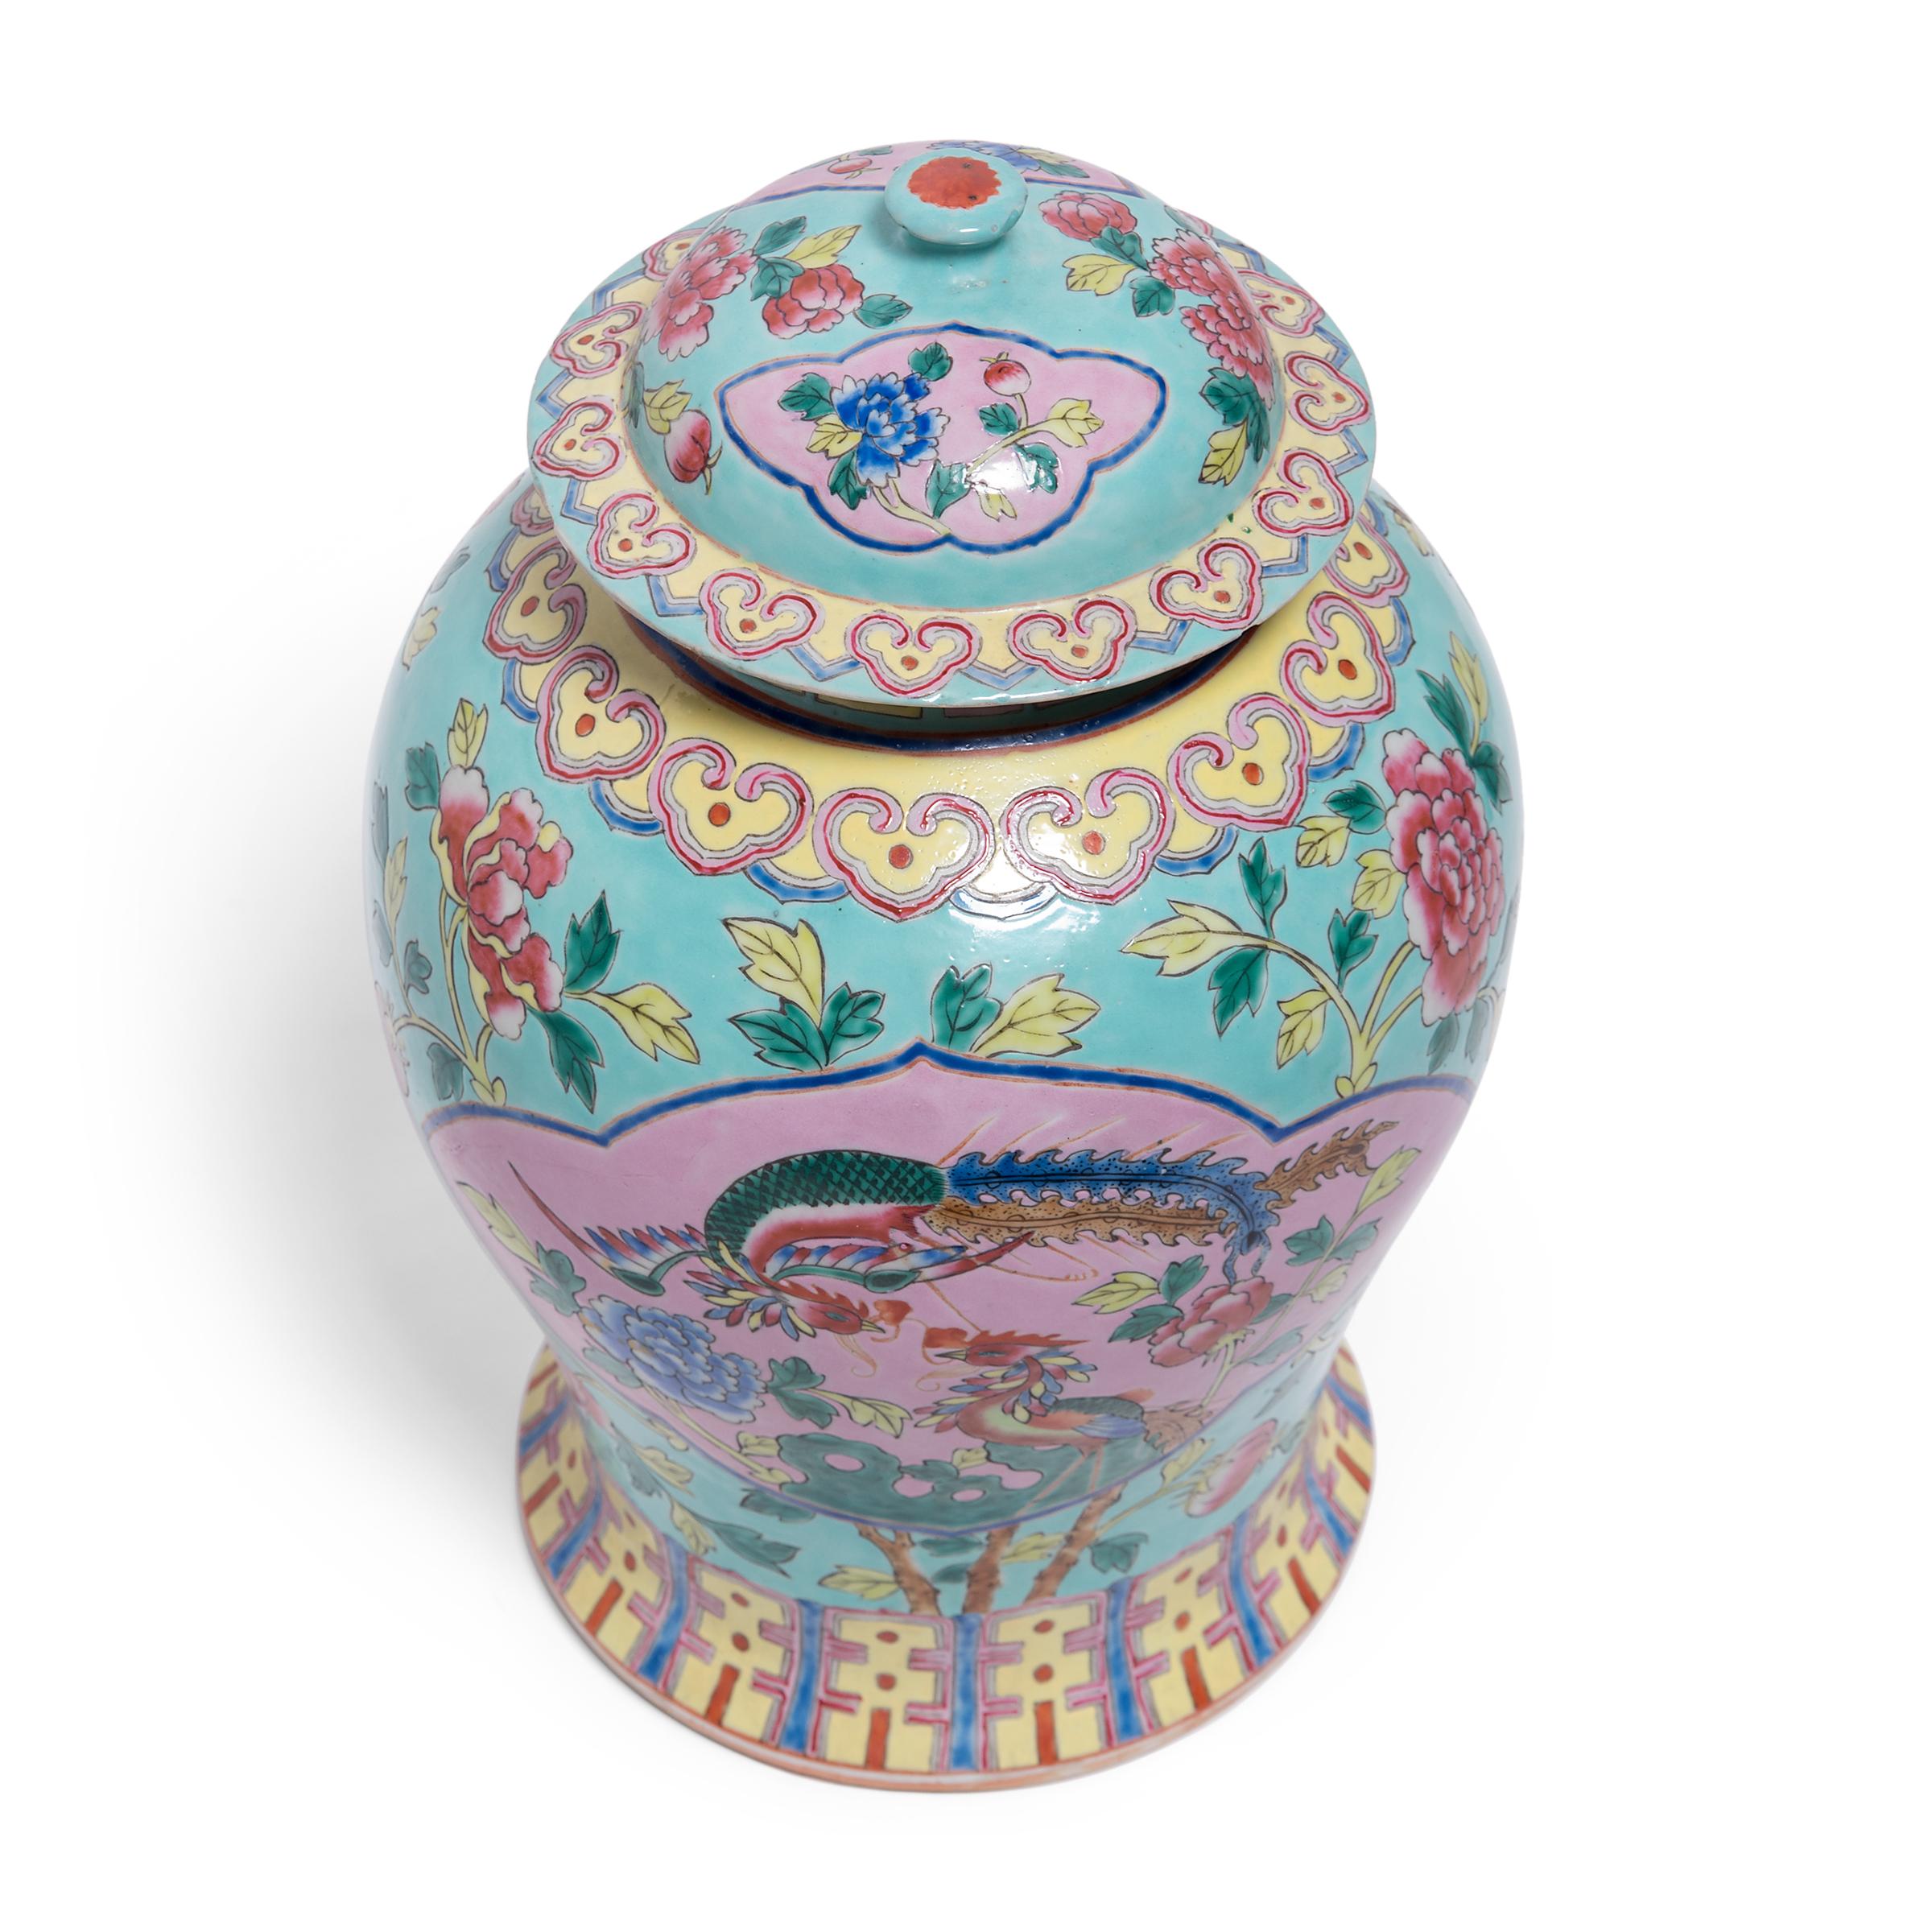 Porcelain Chinese Famille Rose Phoenix and Peony Baluster Jar, c. 1900 For Sale